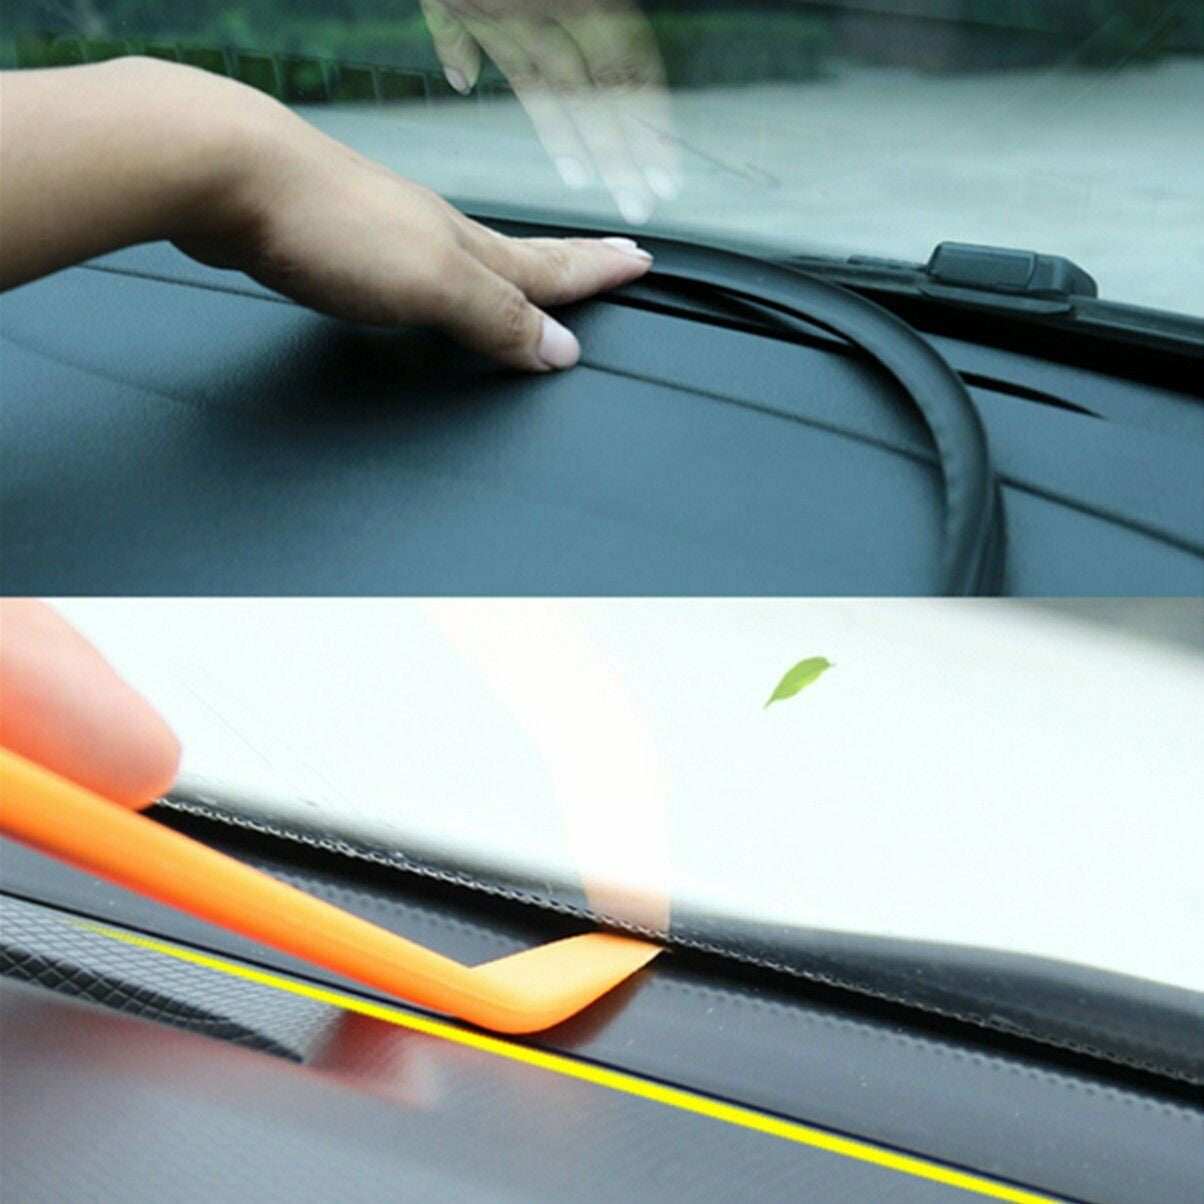 Bang4buck Rubber 1.6m Soundproof Dustproof Sealing Strip for Auto Car Dashboard Windshield 